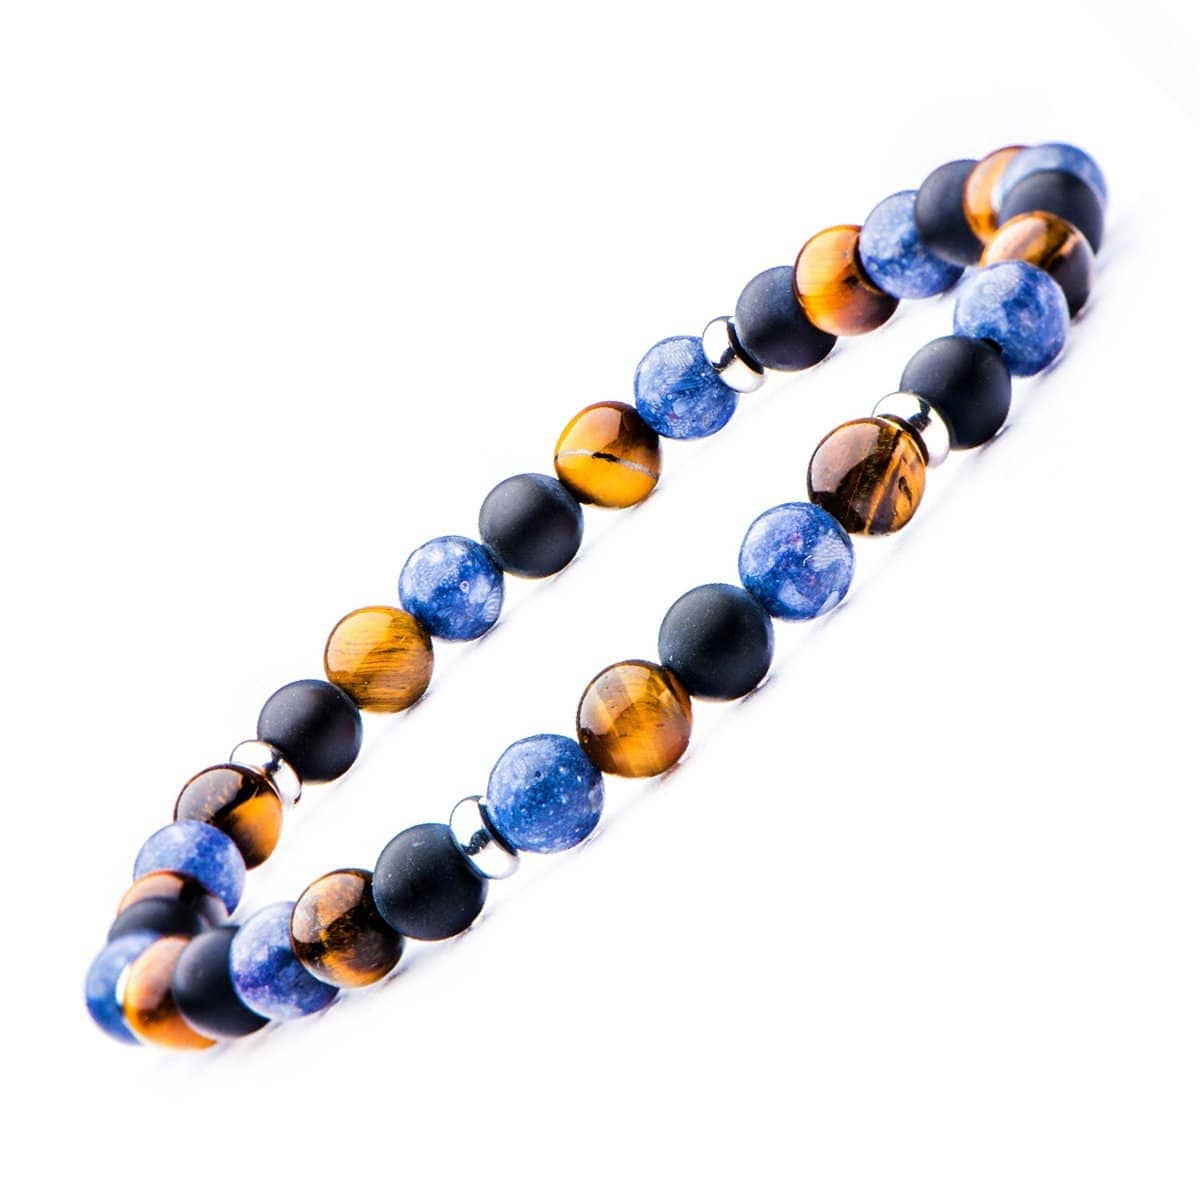 INOX JEWELRY Bracelets Silver Tone Stainless Steel, Black Agate, Blue Coral and Tiger's Eye Stone 6mm Bead Stackable Bracelet BRSS001M